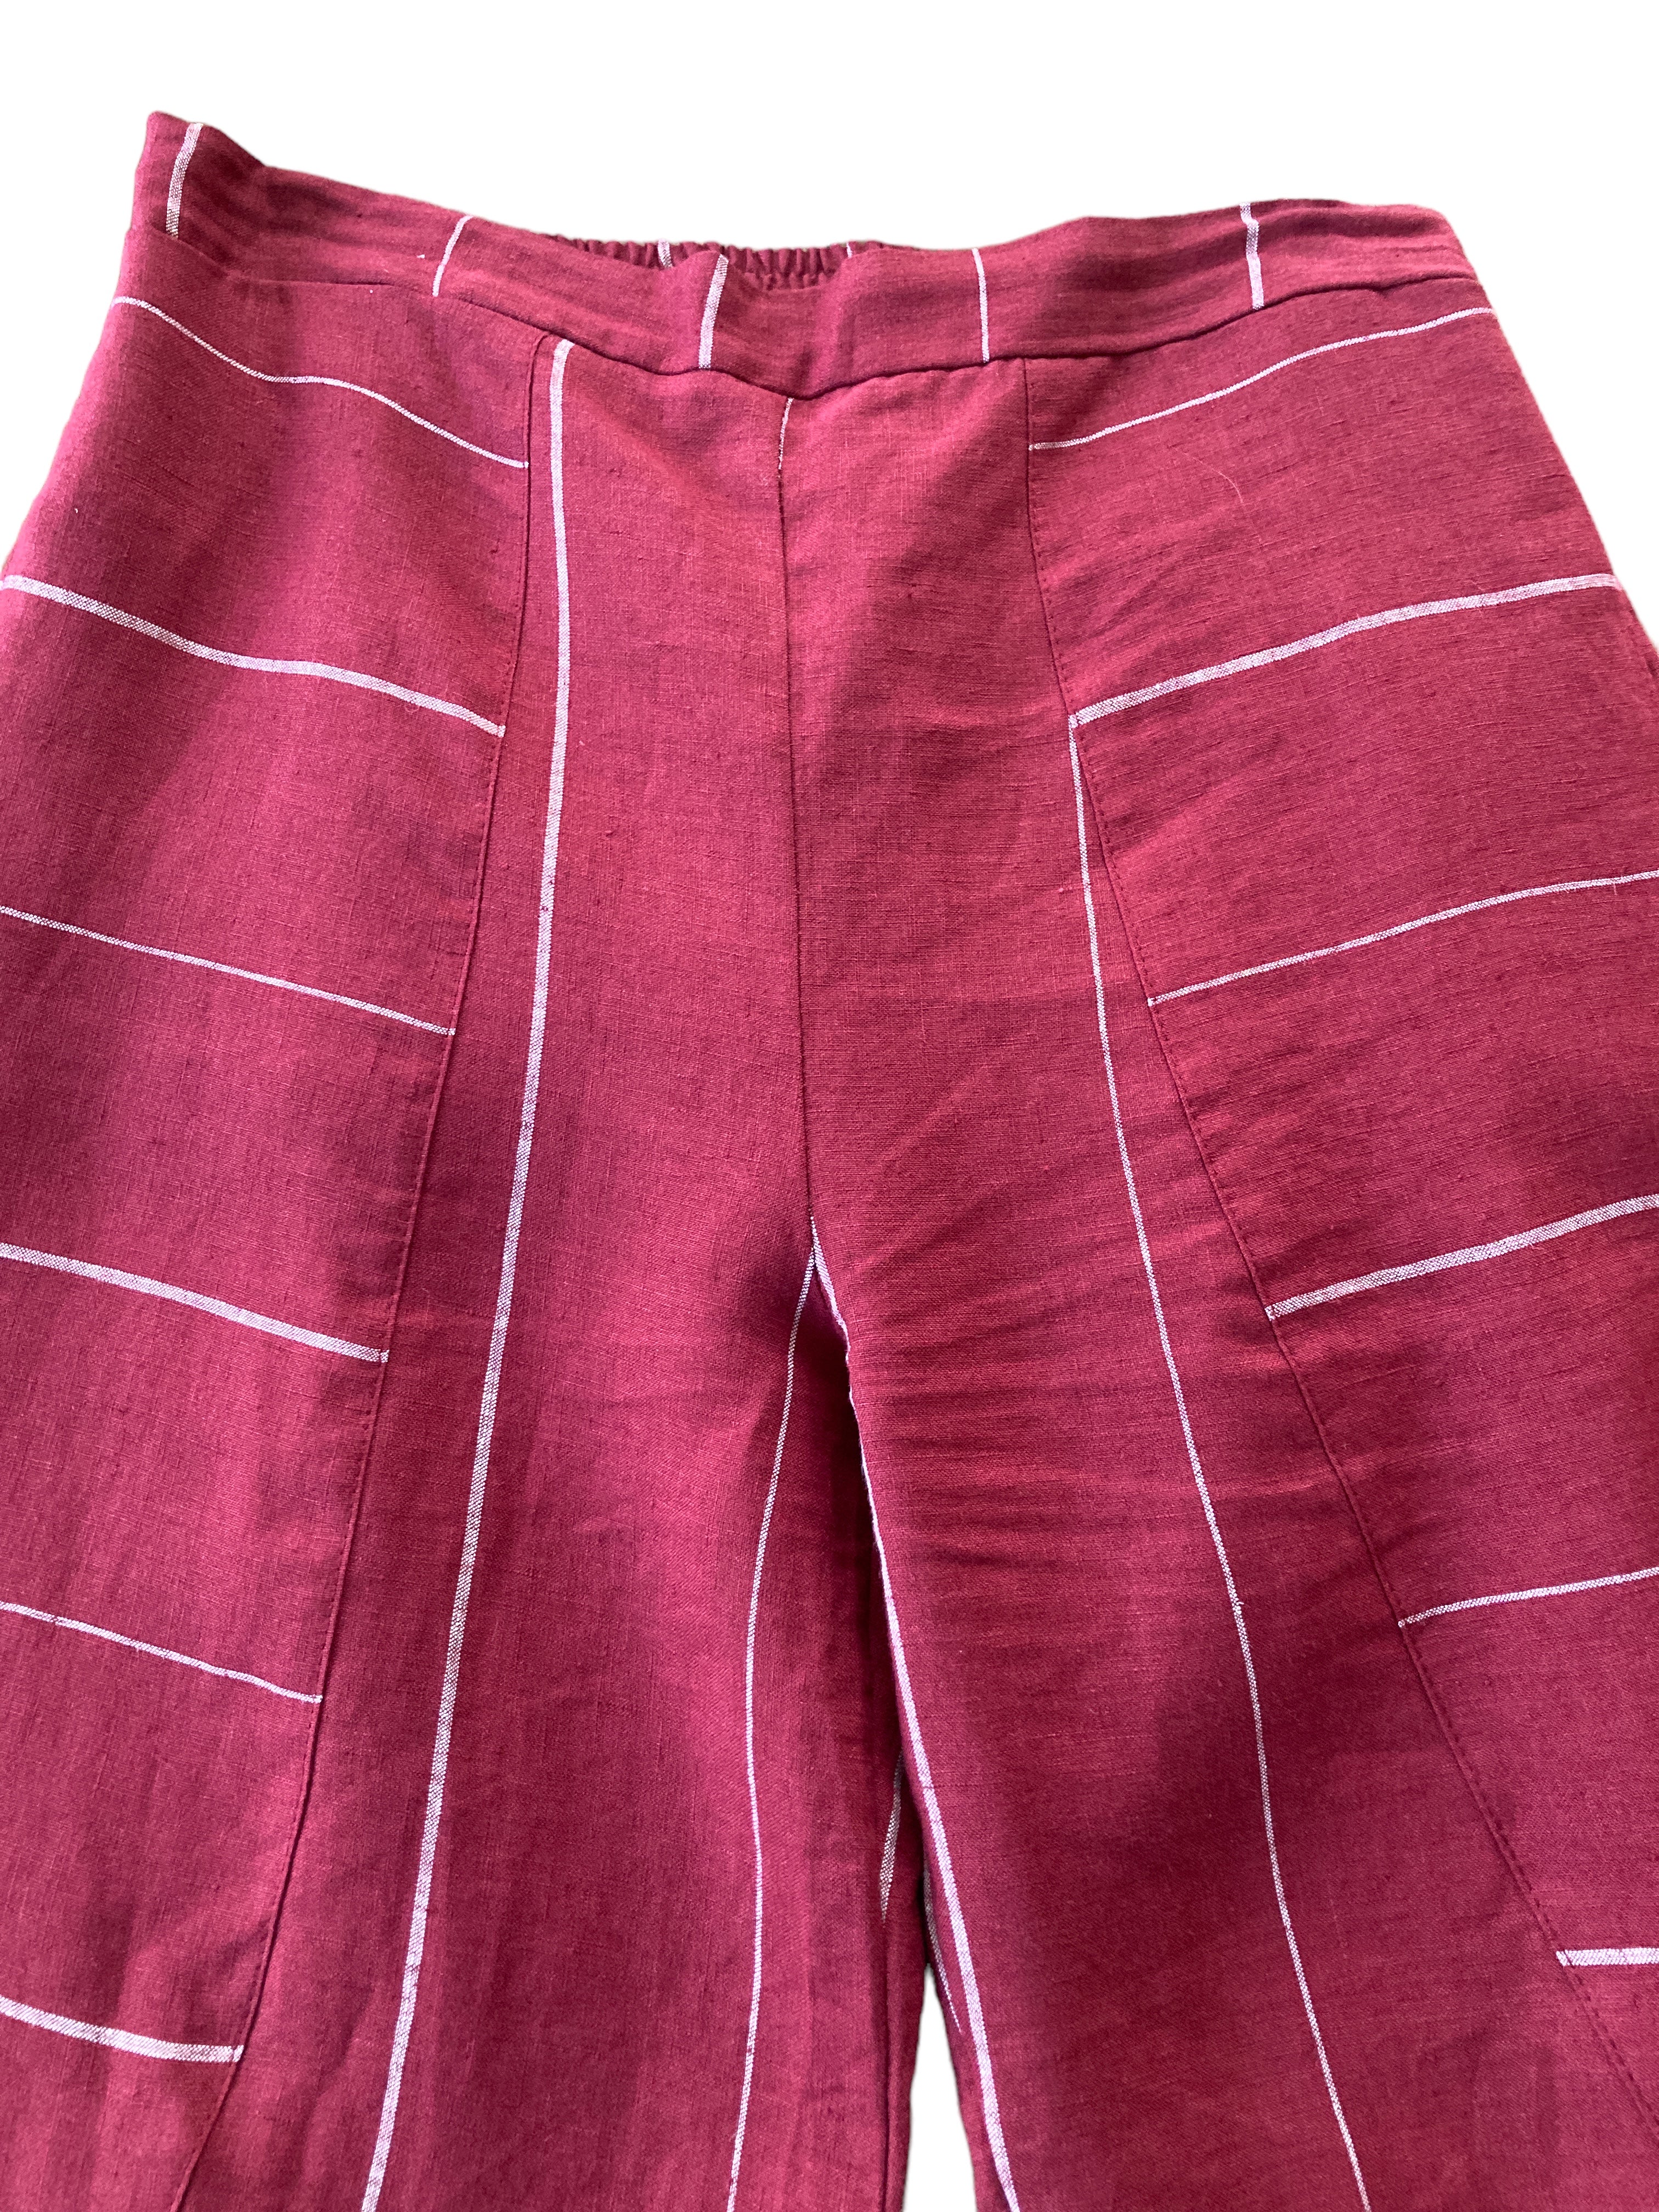 Inizio Red with White Stripes Linen Pants, M